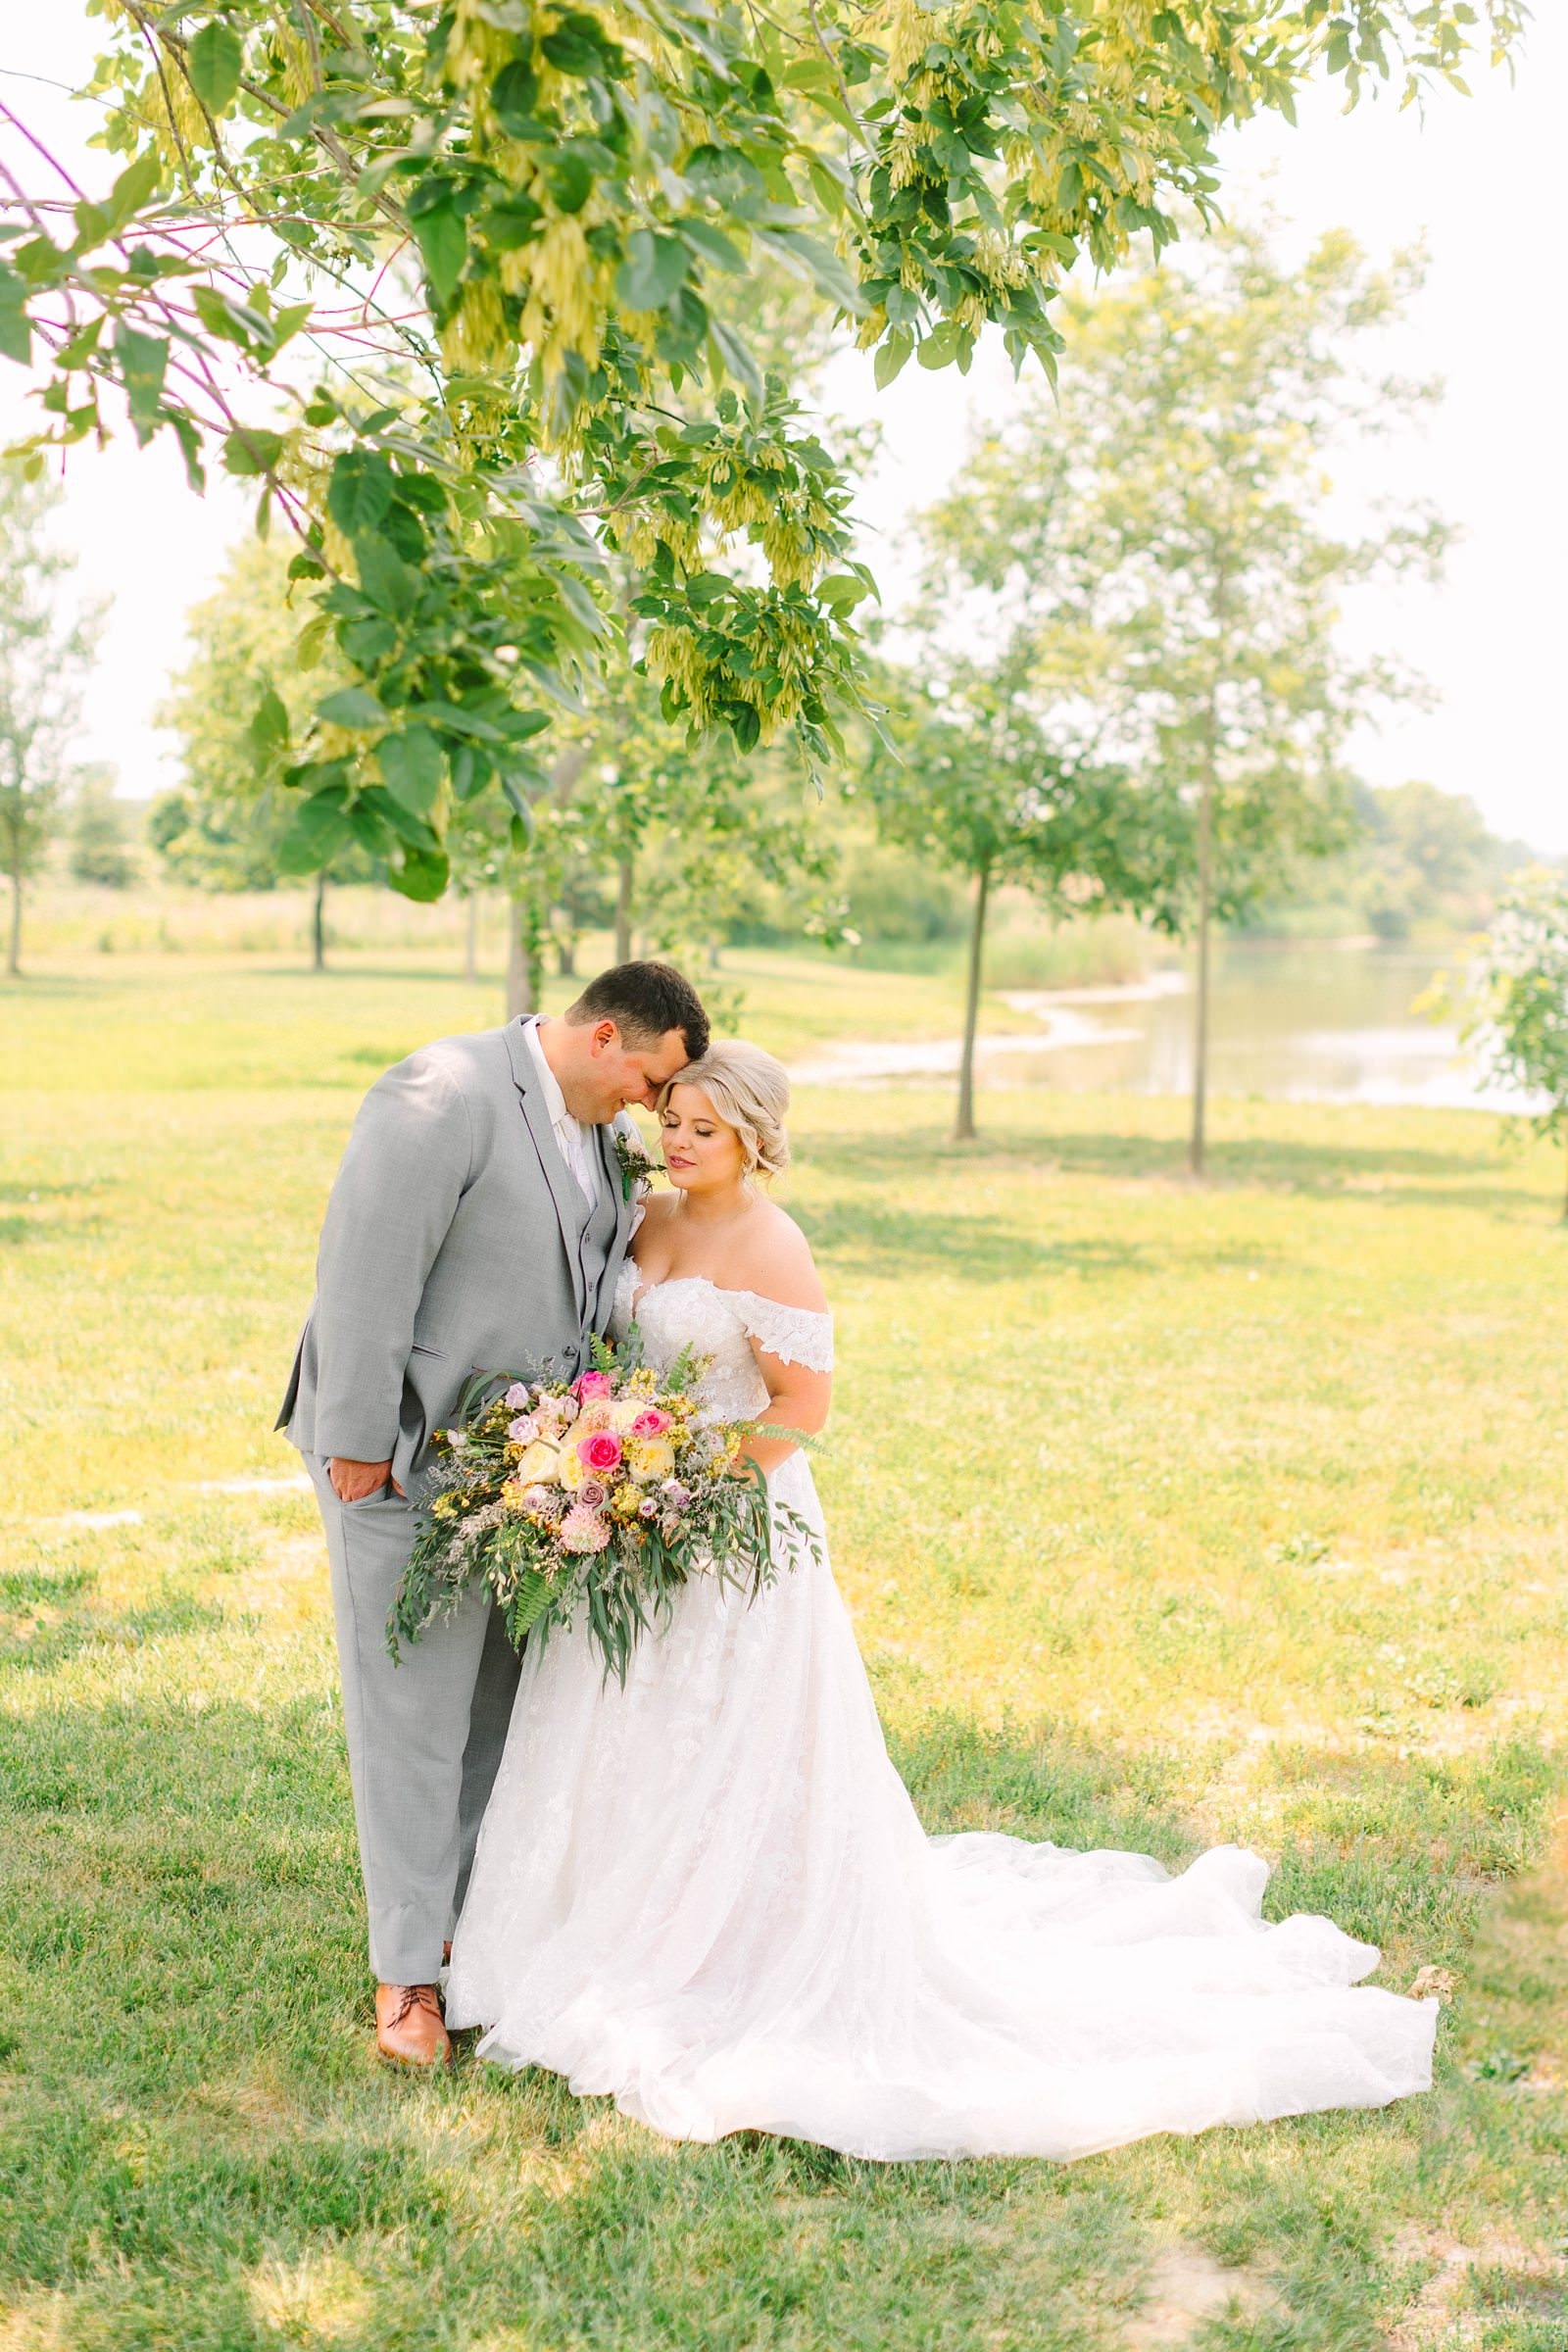 A Sunny Summer Wedding at Friedman Park in Newburgh Indiana | Paige and Dylan | Bret and Brandie Photography078.jpg